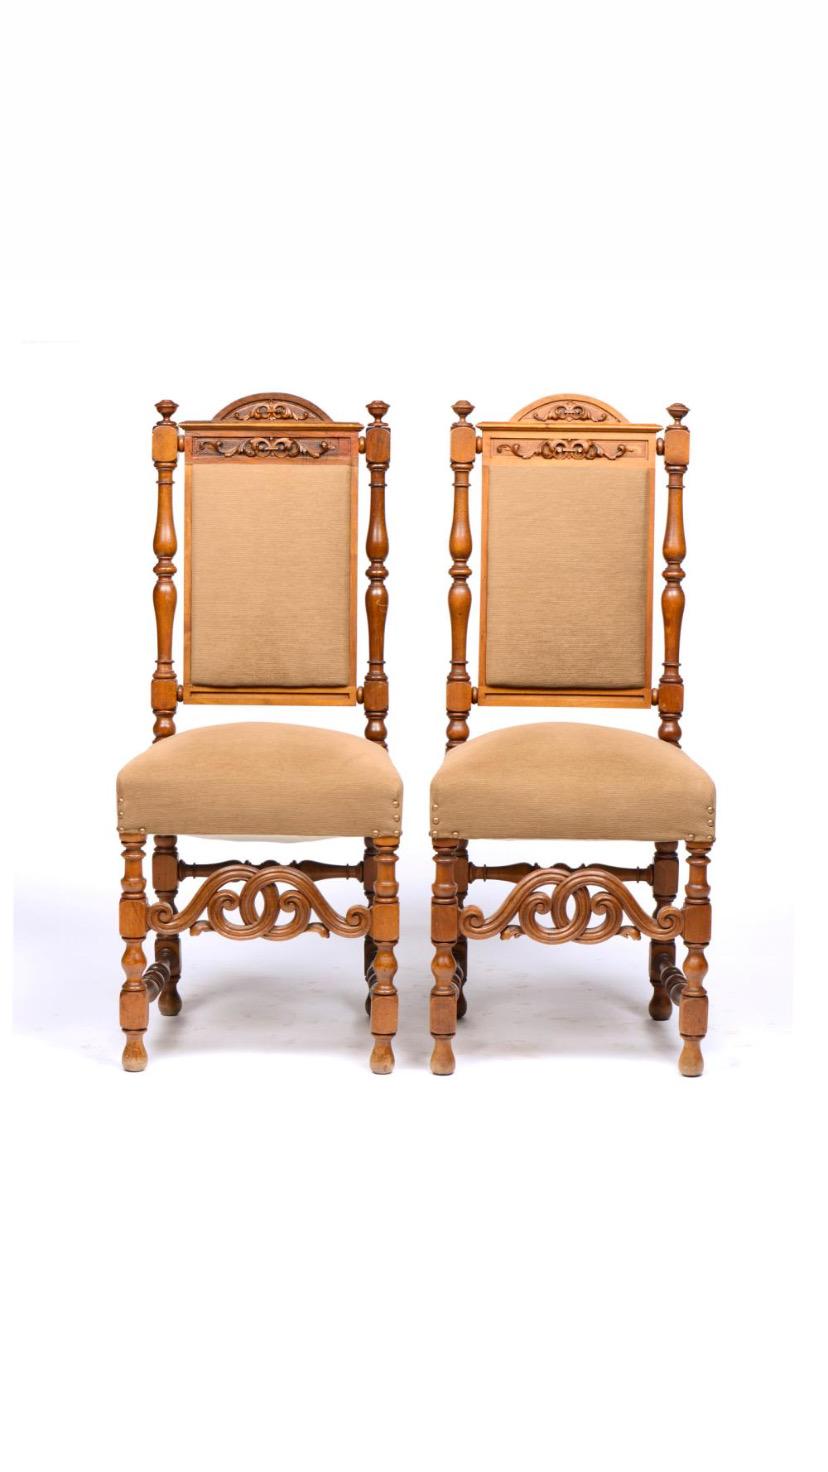 Set of 16 Portuguese Wooden Chairs, circa 19th Century For Sale 4